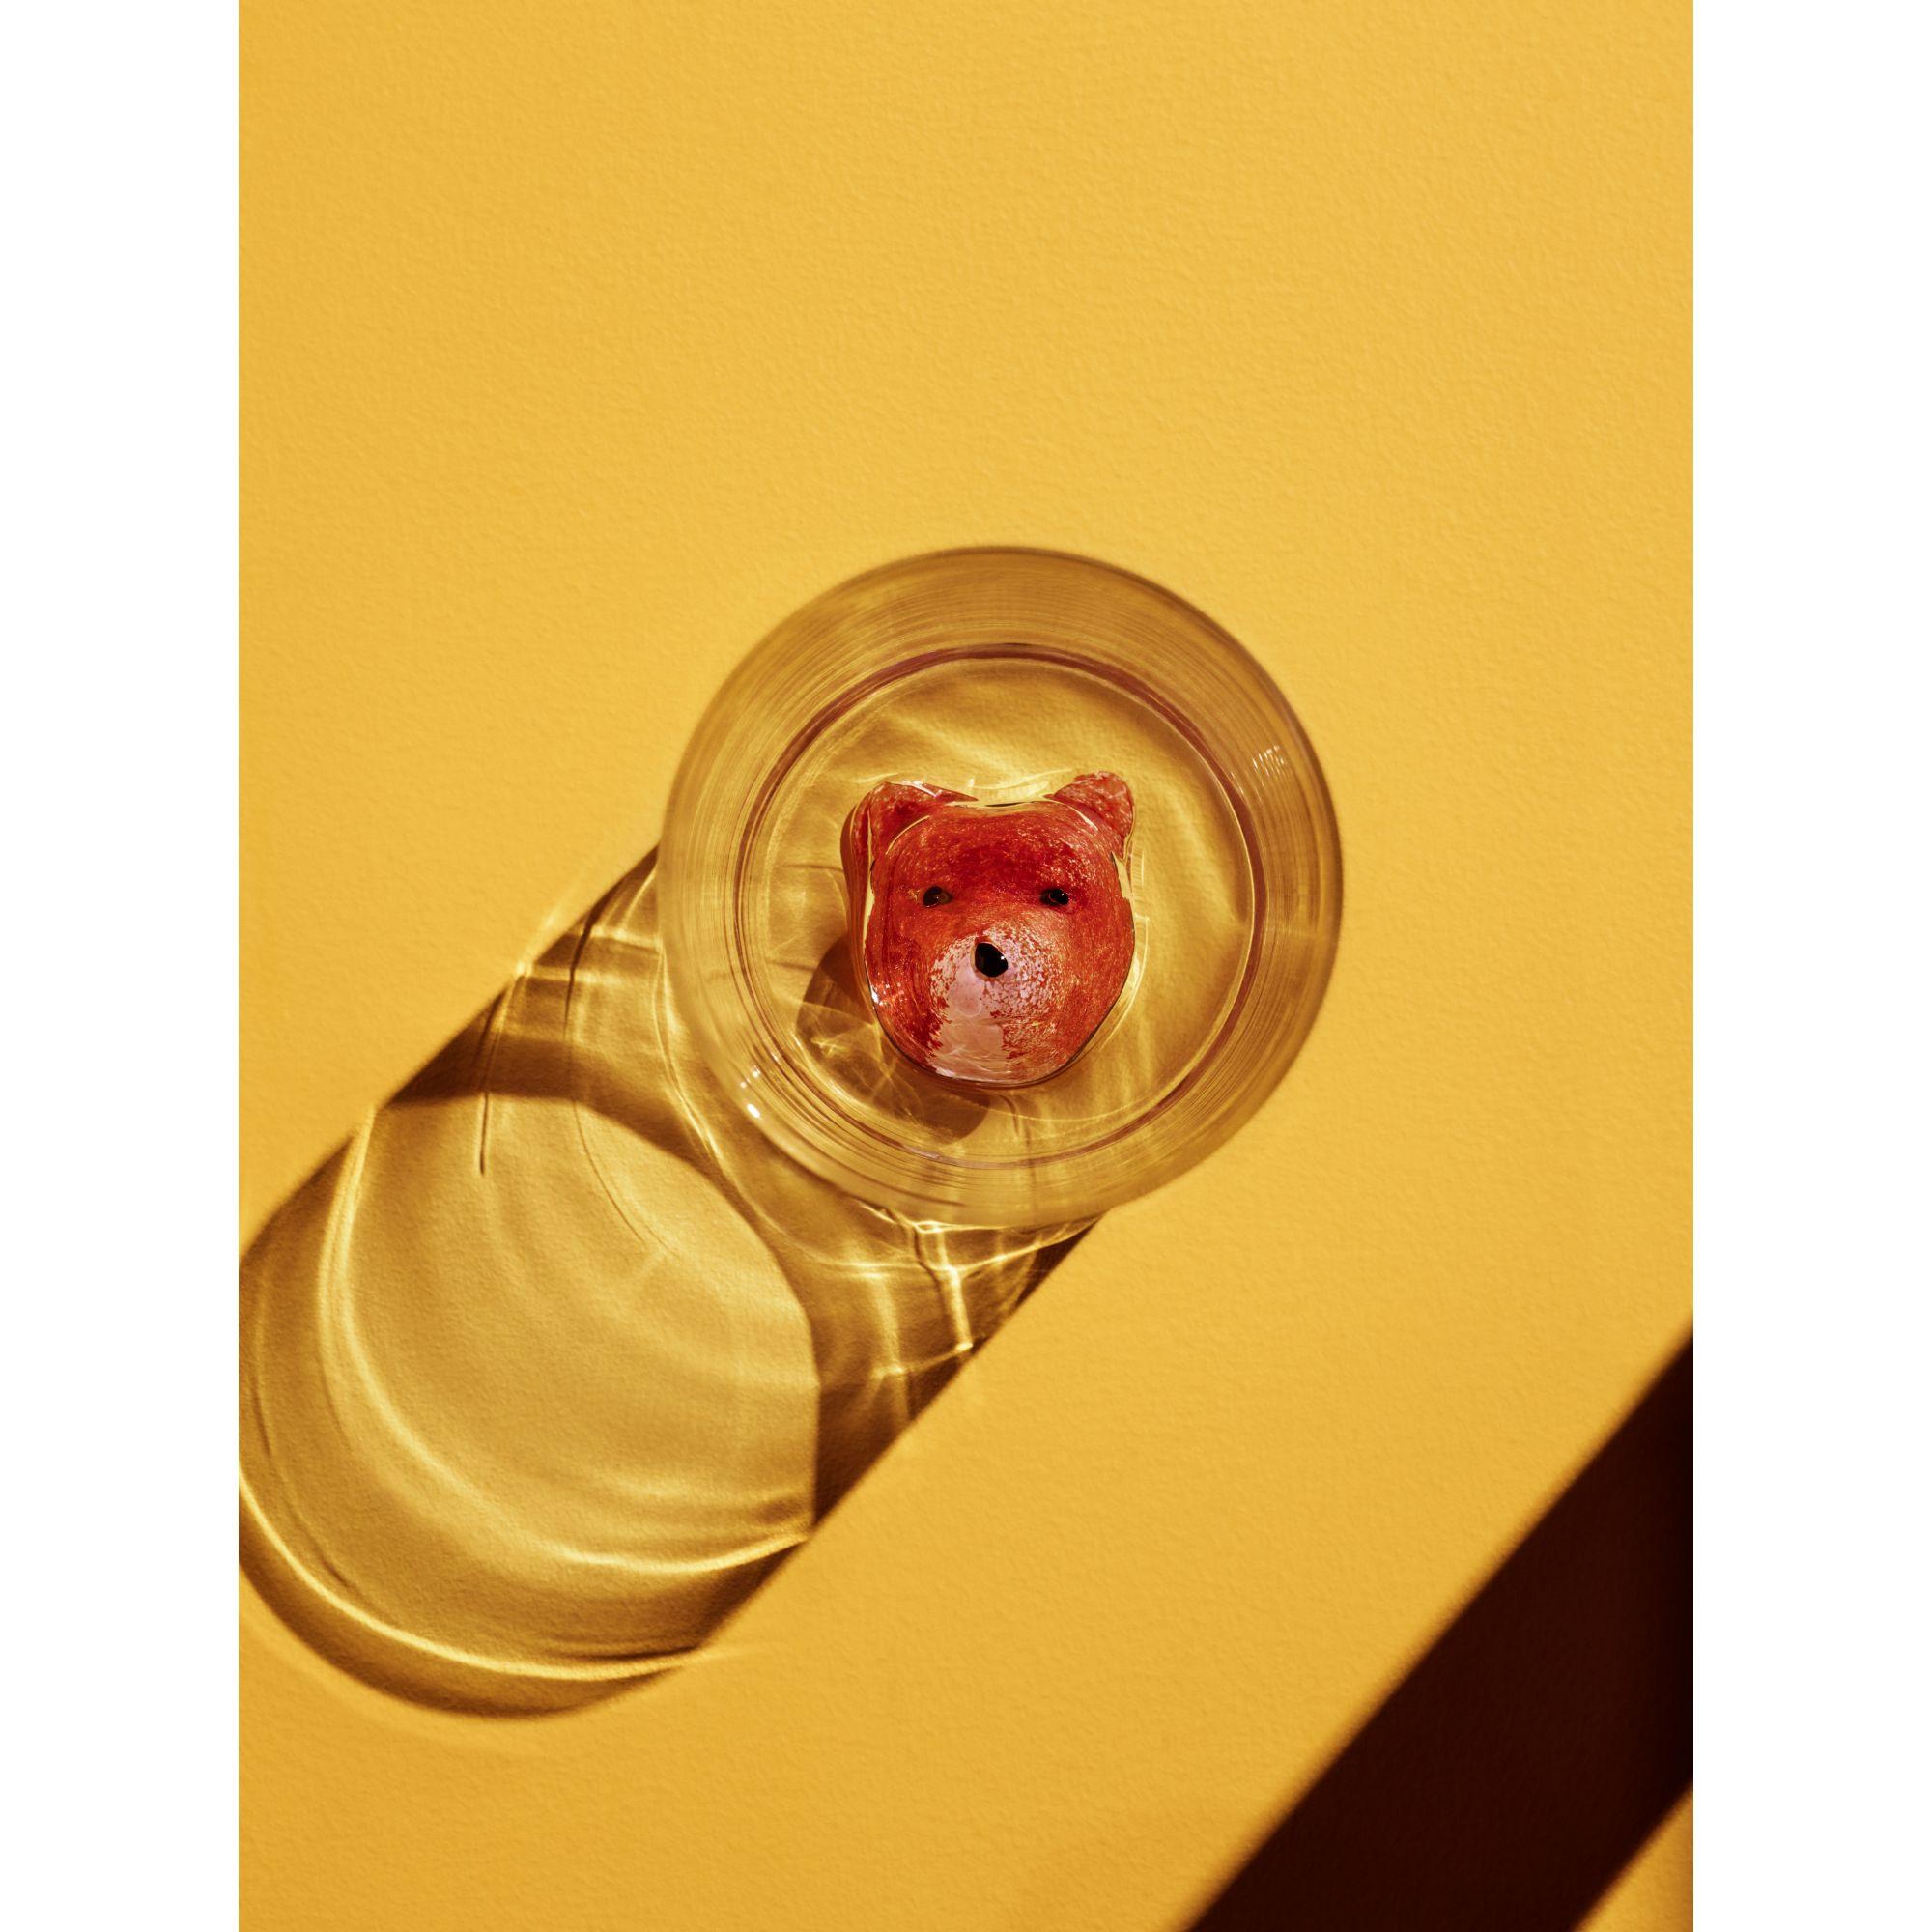 Hey stranger, do you want to be my new friend? Let’s get to know each other over a drink! New Friends glasses from Kosta Boda have small sculptures in the base that are shaped like animals. A curious little fox peeks up from this tumbler. The glass